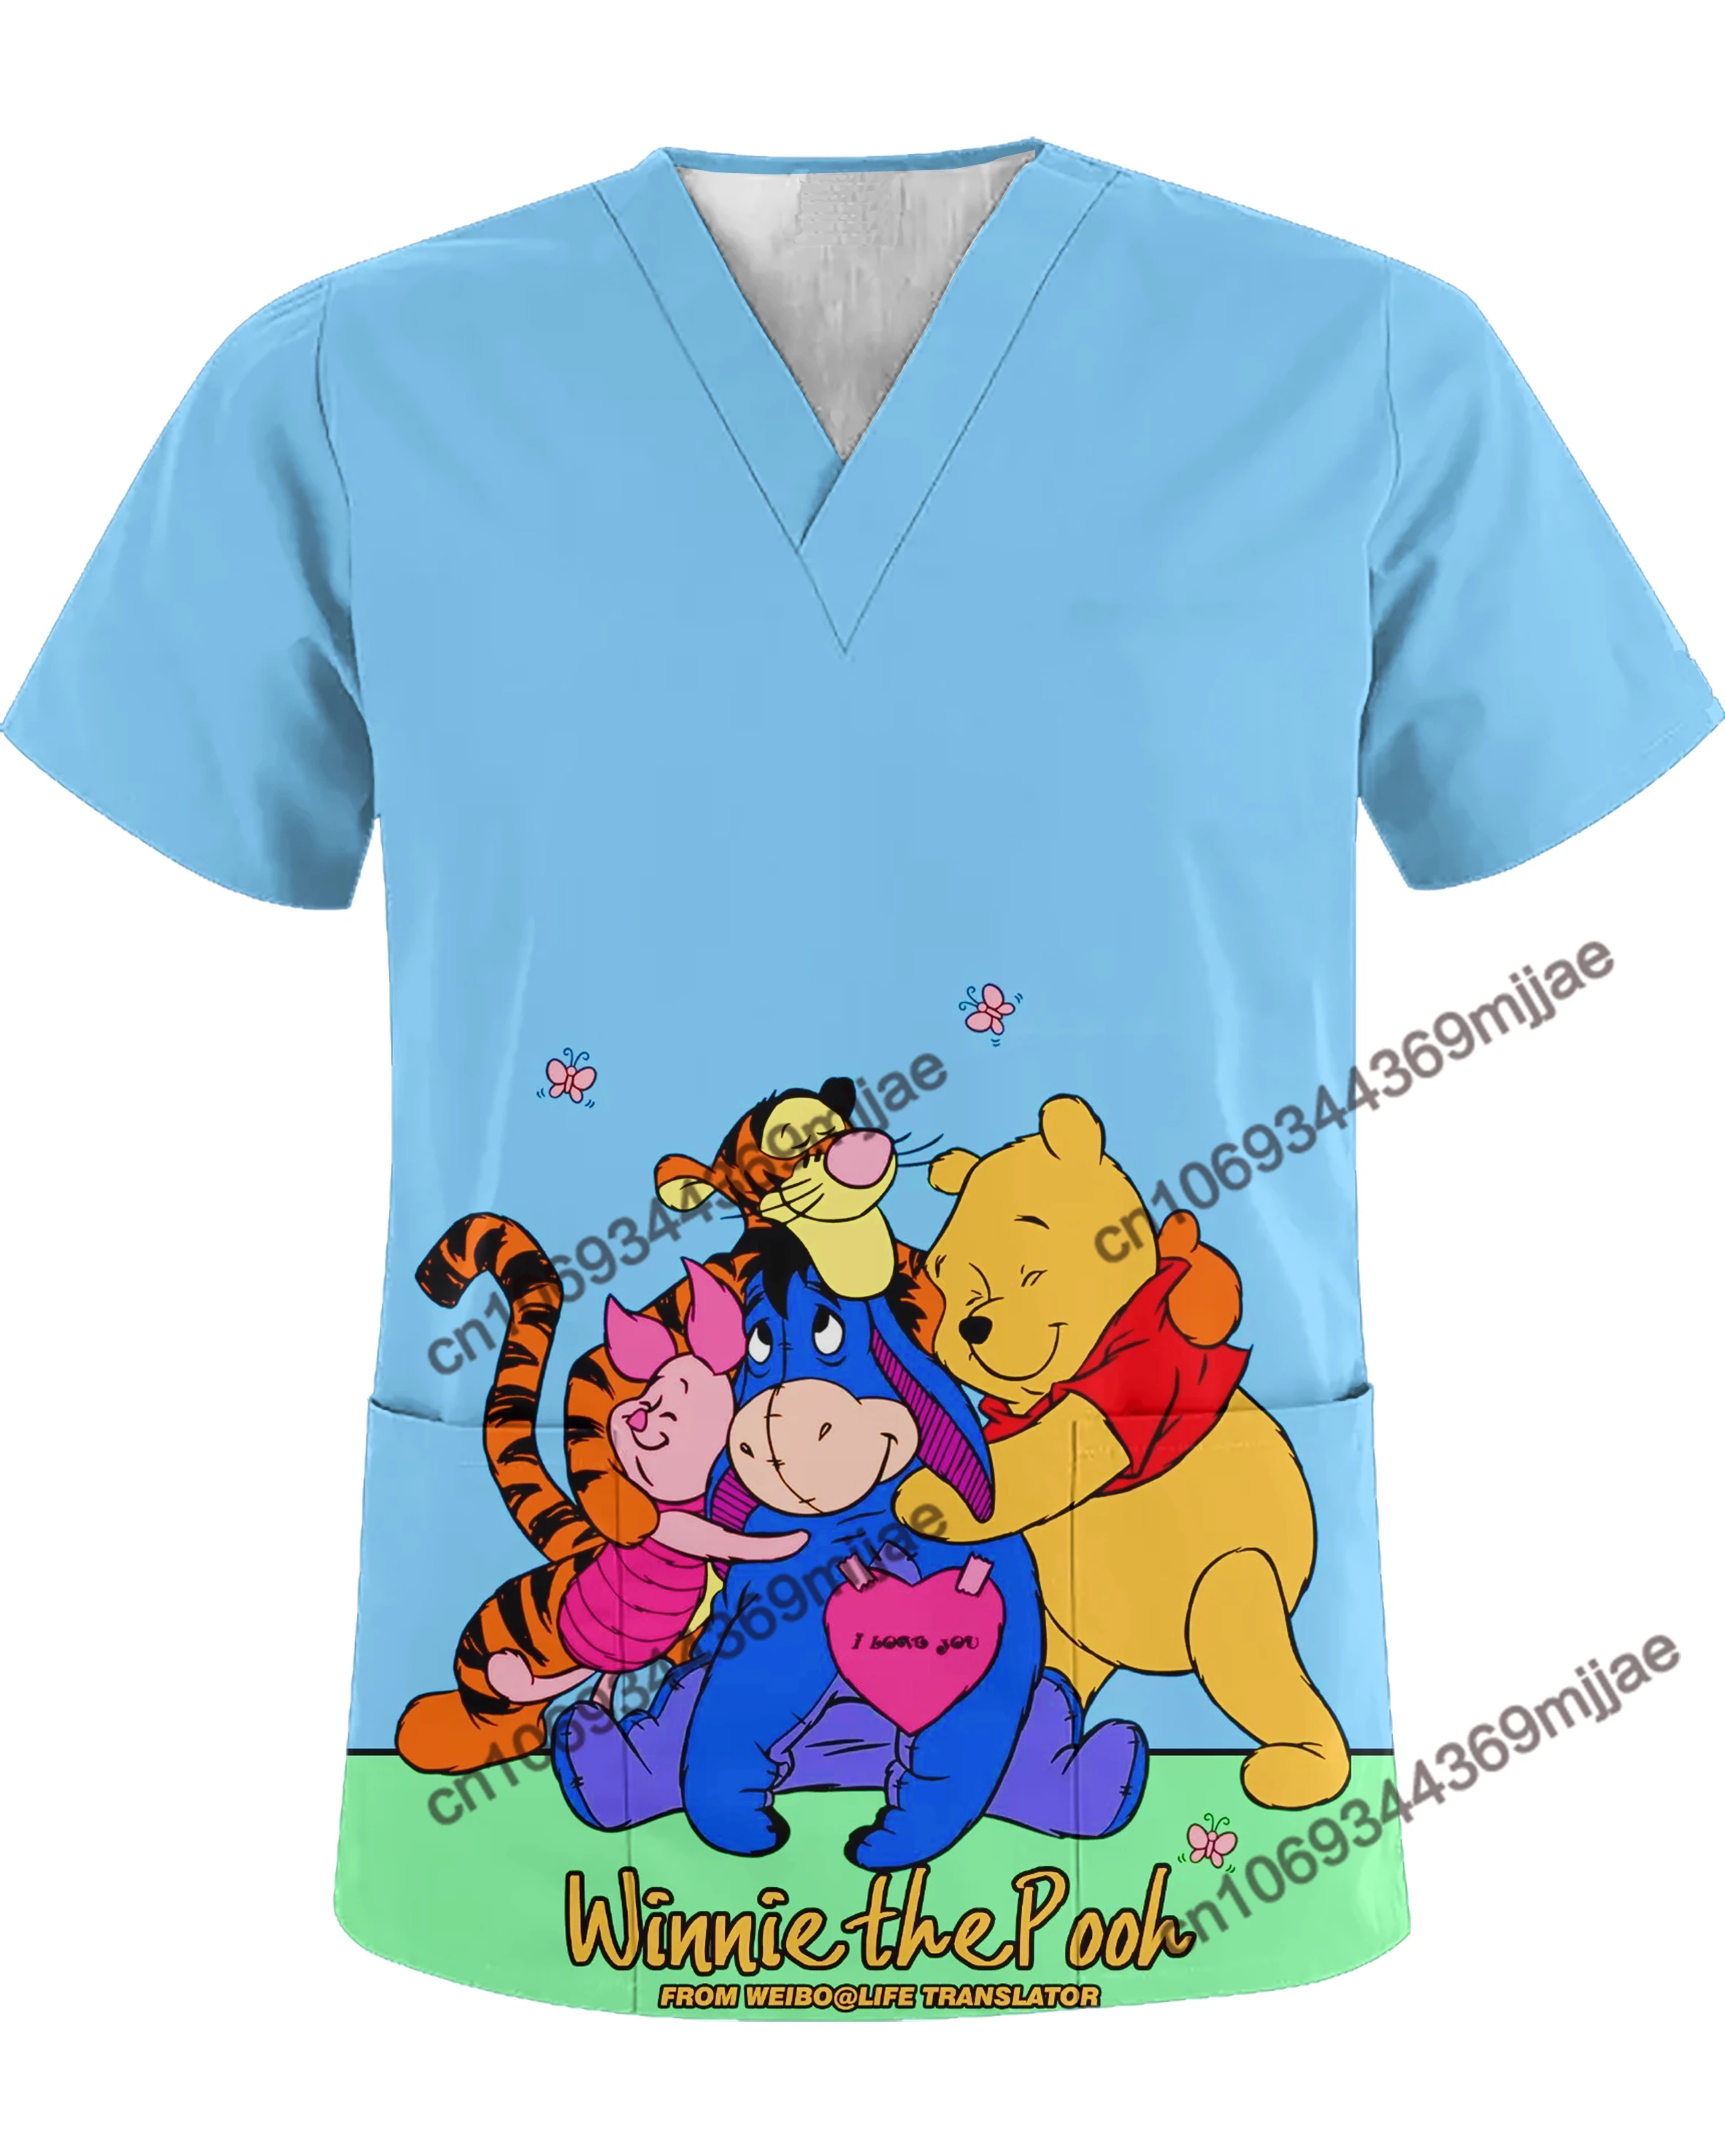 

Disney Nurse Uniform Pocket Y2k Fashion Top Women Cheap Women's Clothing and Free Shipping Offers Mickey Mouse Y 2k Vintage Kpop